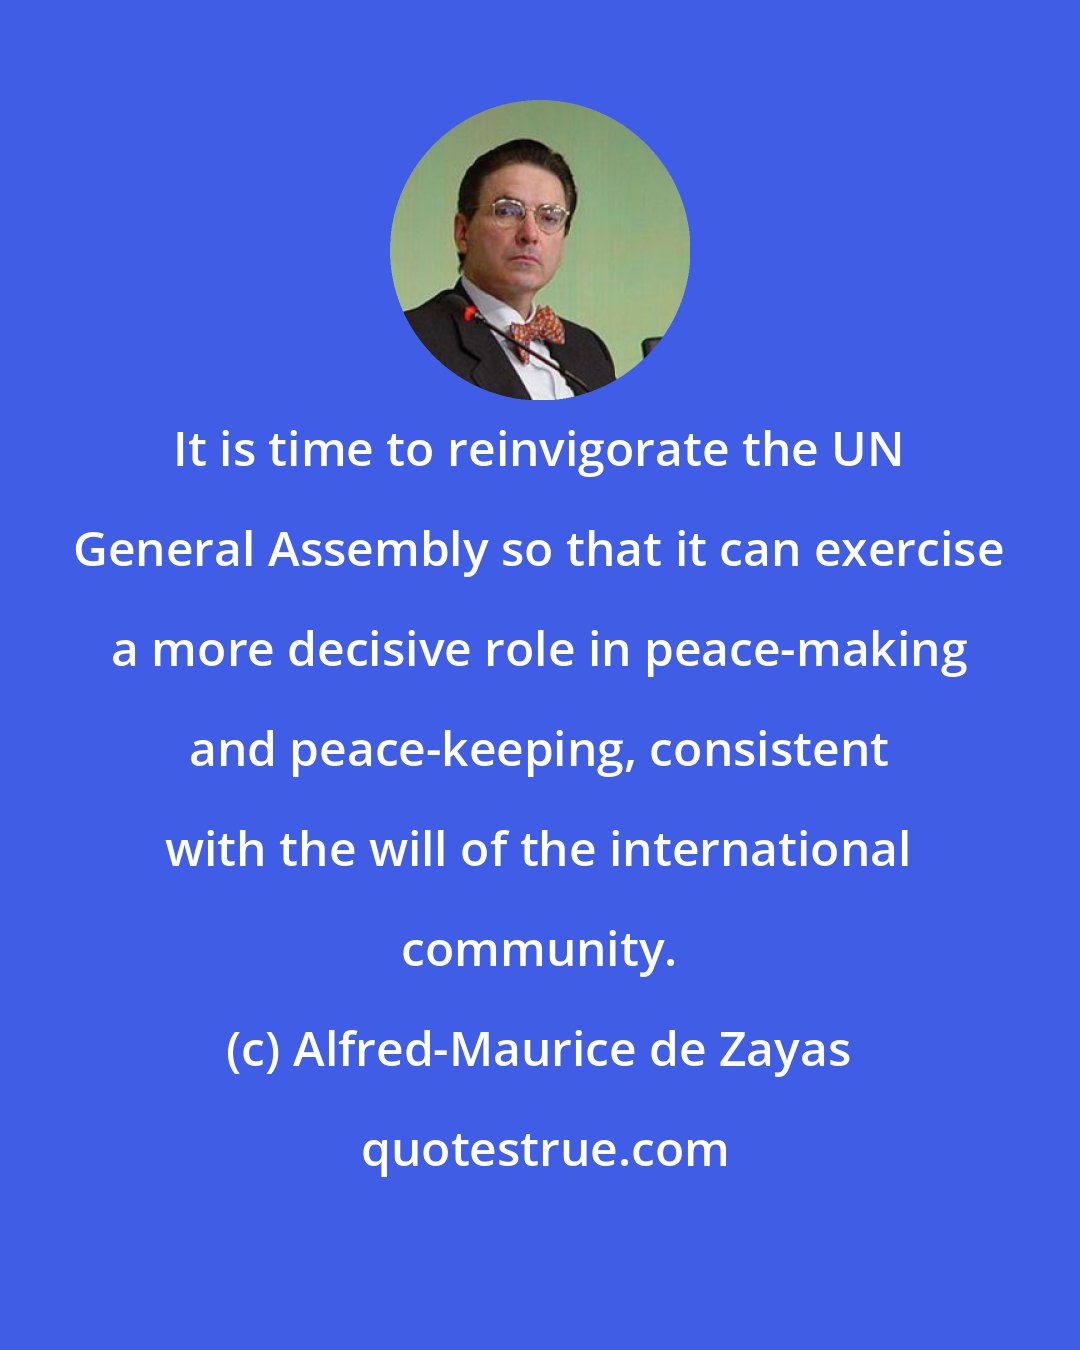 Alfred-Maurice de Zayas: It is time to reinvigorate the UN General Assembly so that it can exercise a more decisive role in peace-making and peace-keeping, consistent with the will of the international community.